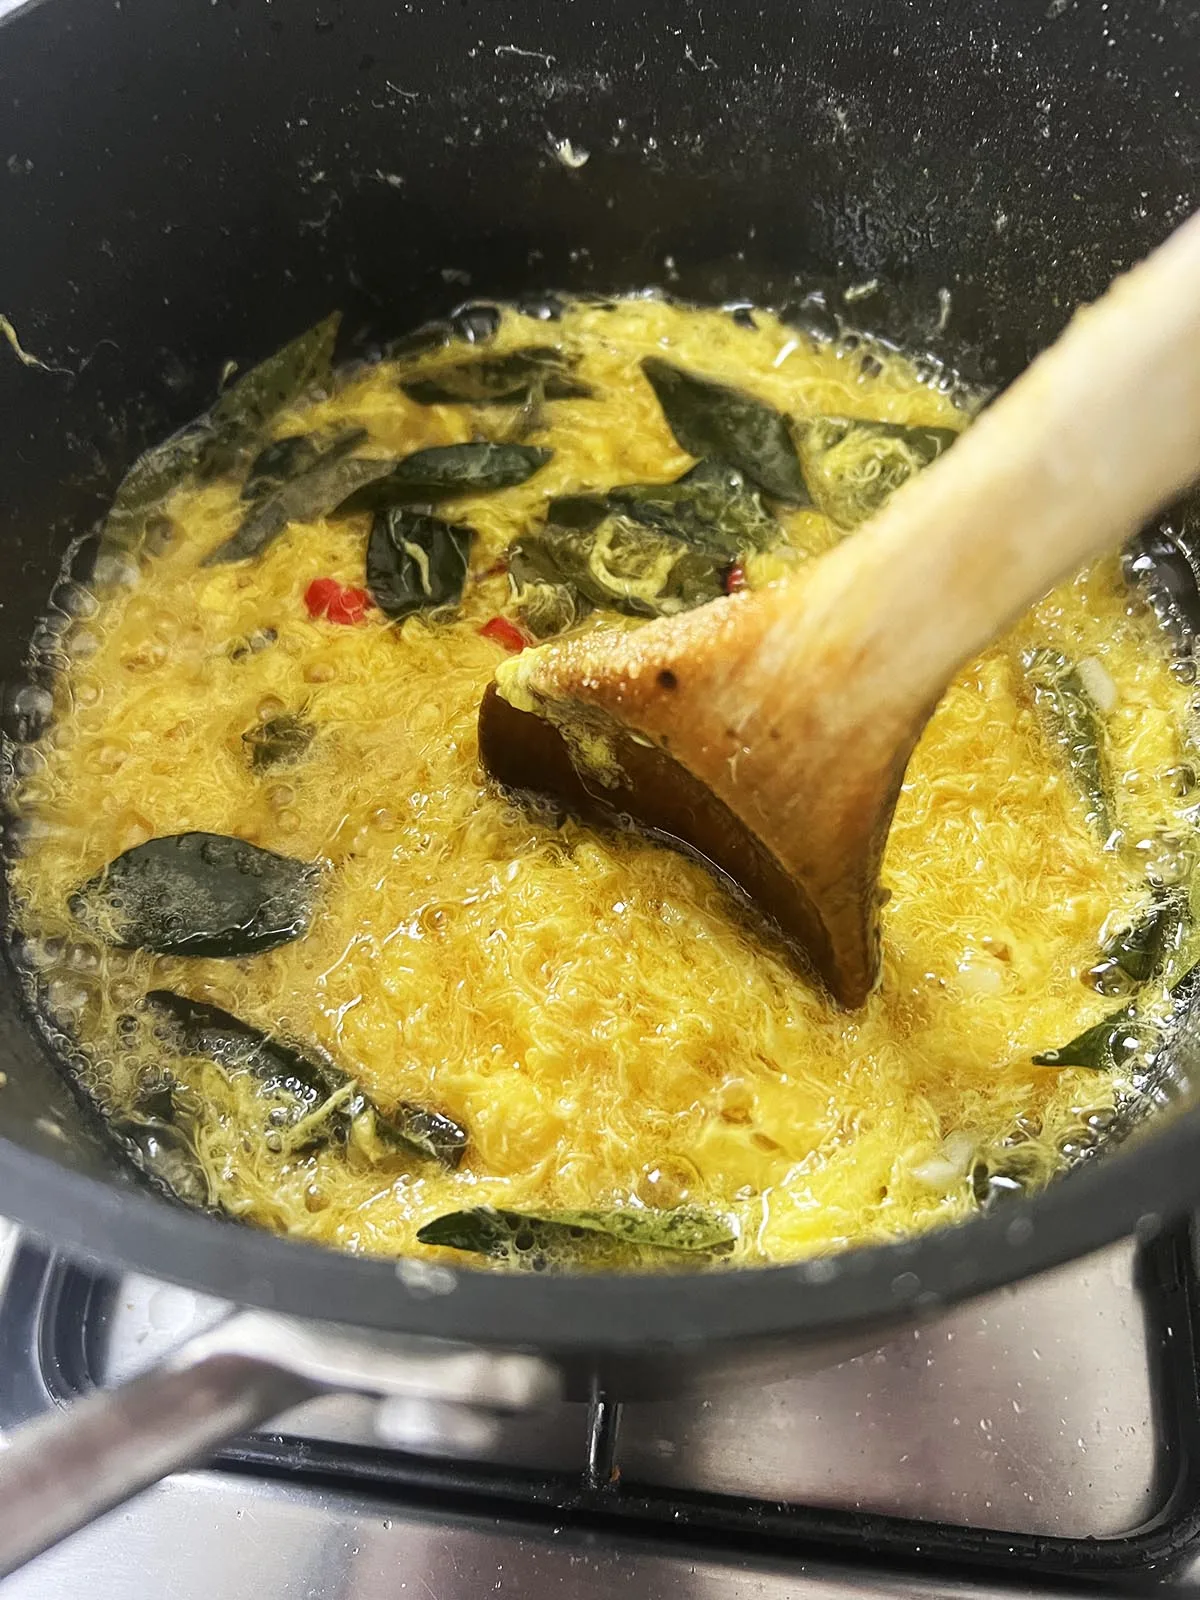 Stirring curry leaves and chillies into the egg yolk mixture.